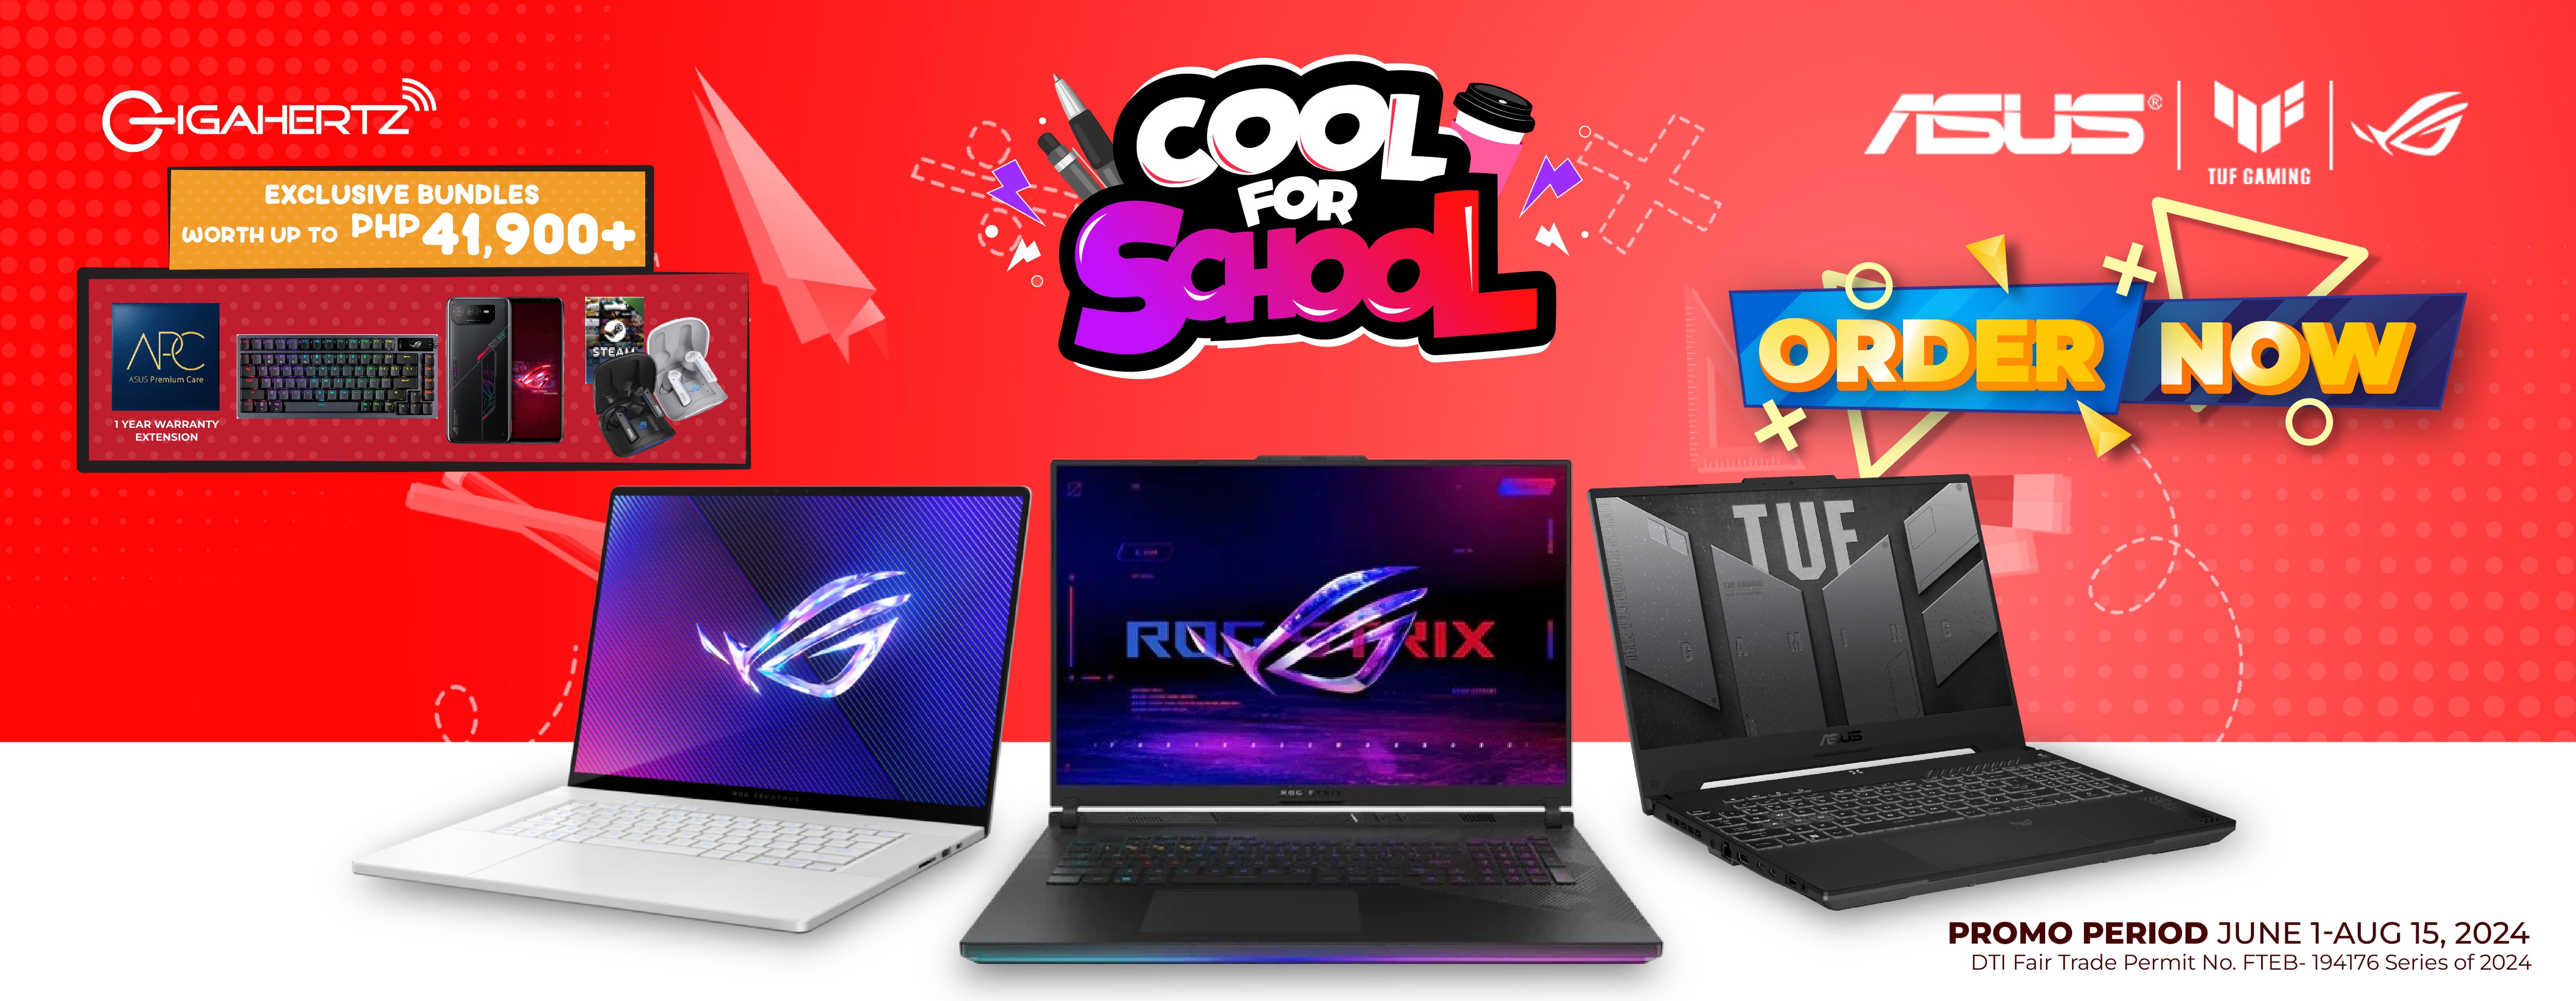 back to school | cool for school | promo deals | student discounts | discounted items | educational products | gigahertz